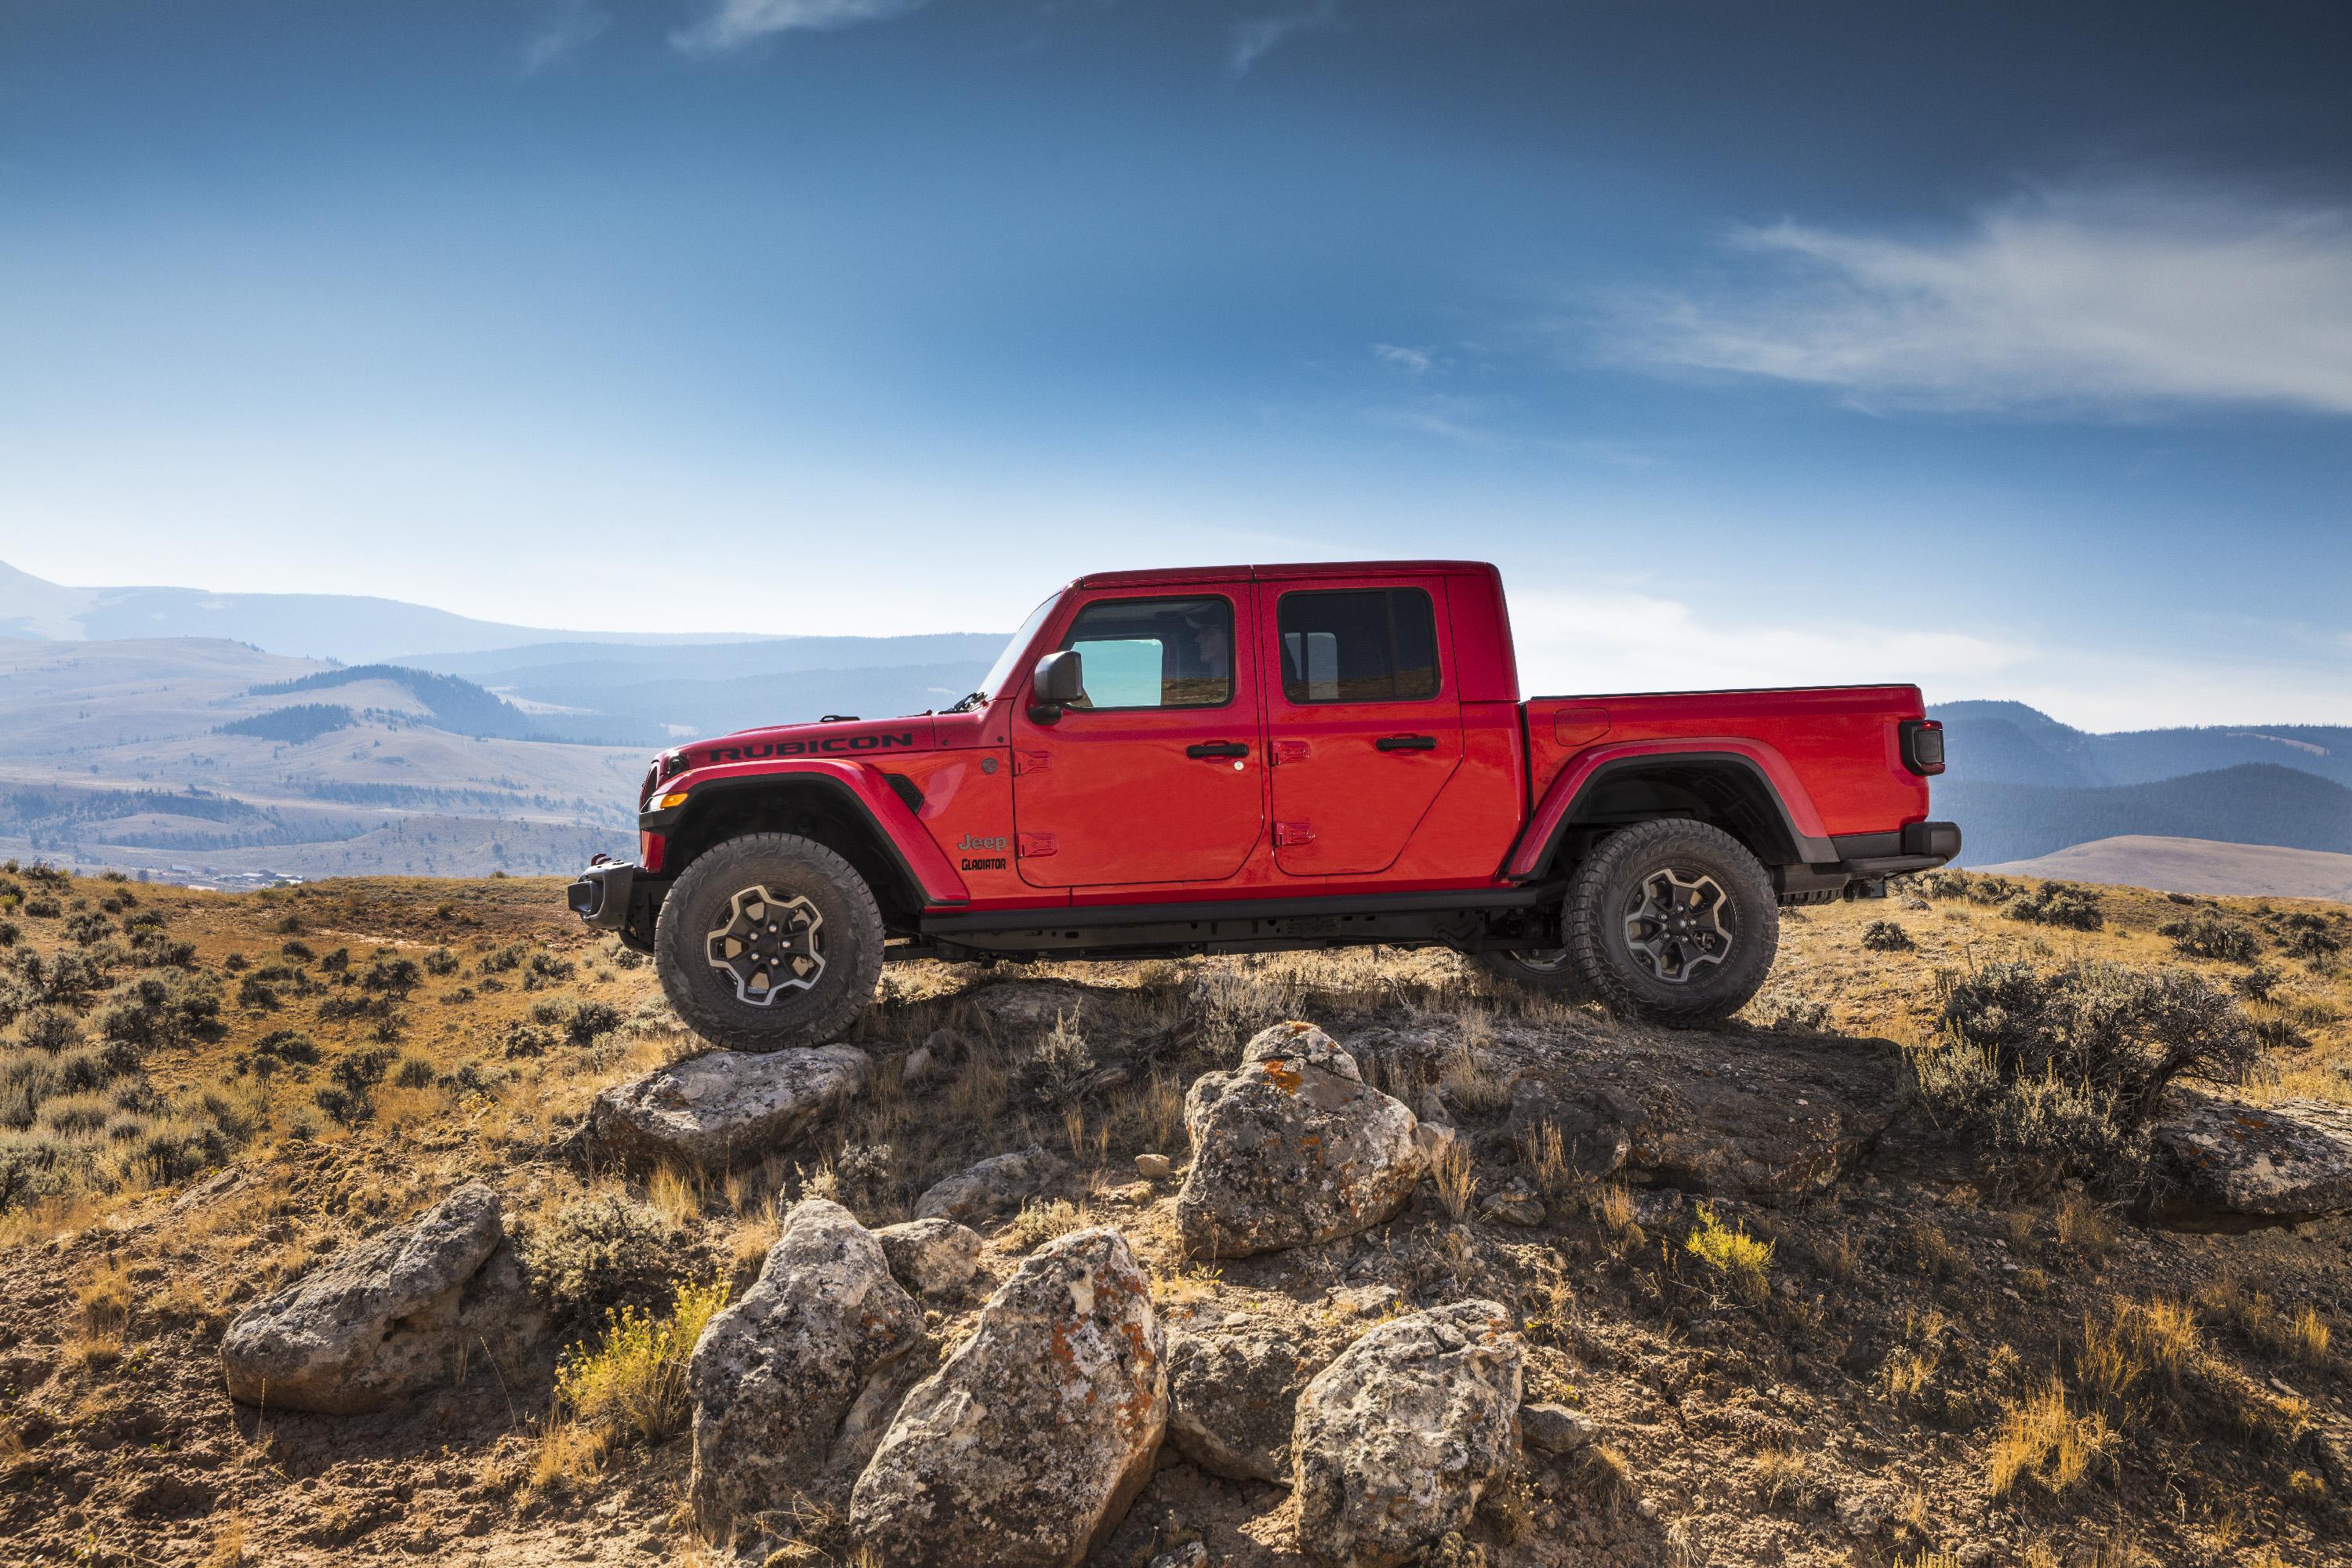 Jeep Rubicon Gladiator Wallpapers Wallpaper Cave